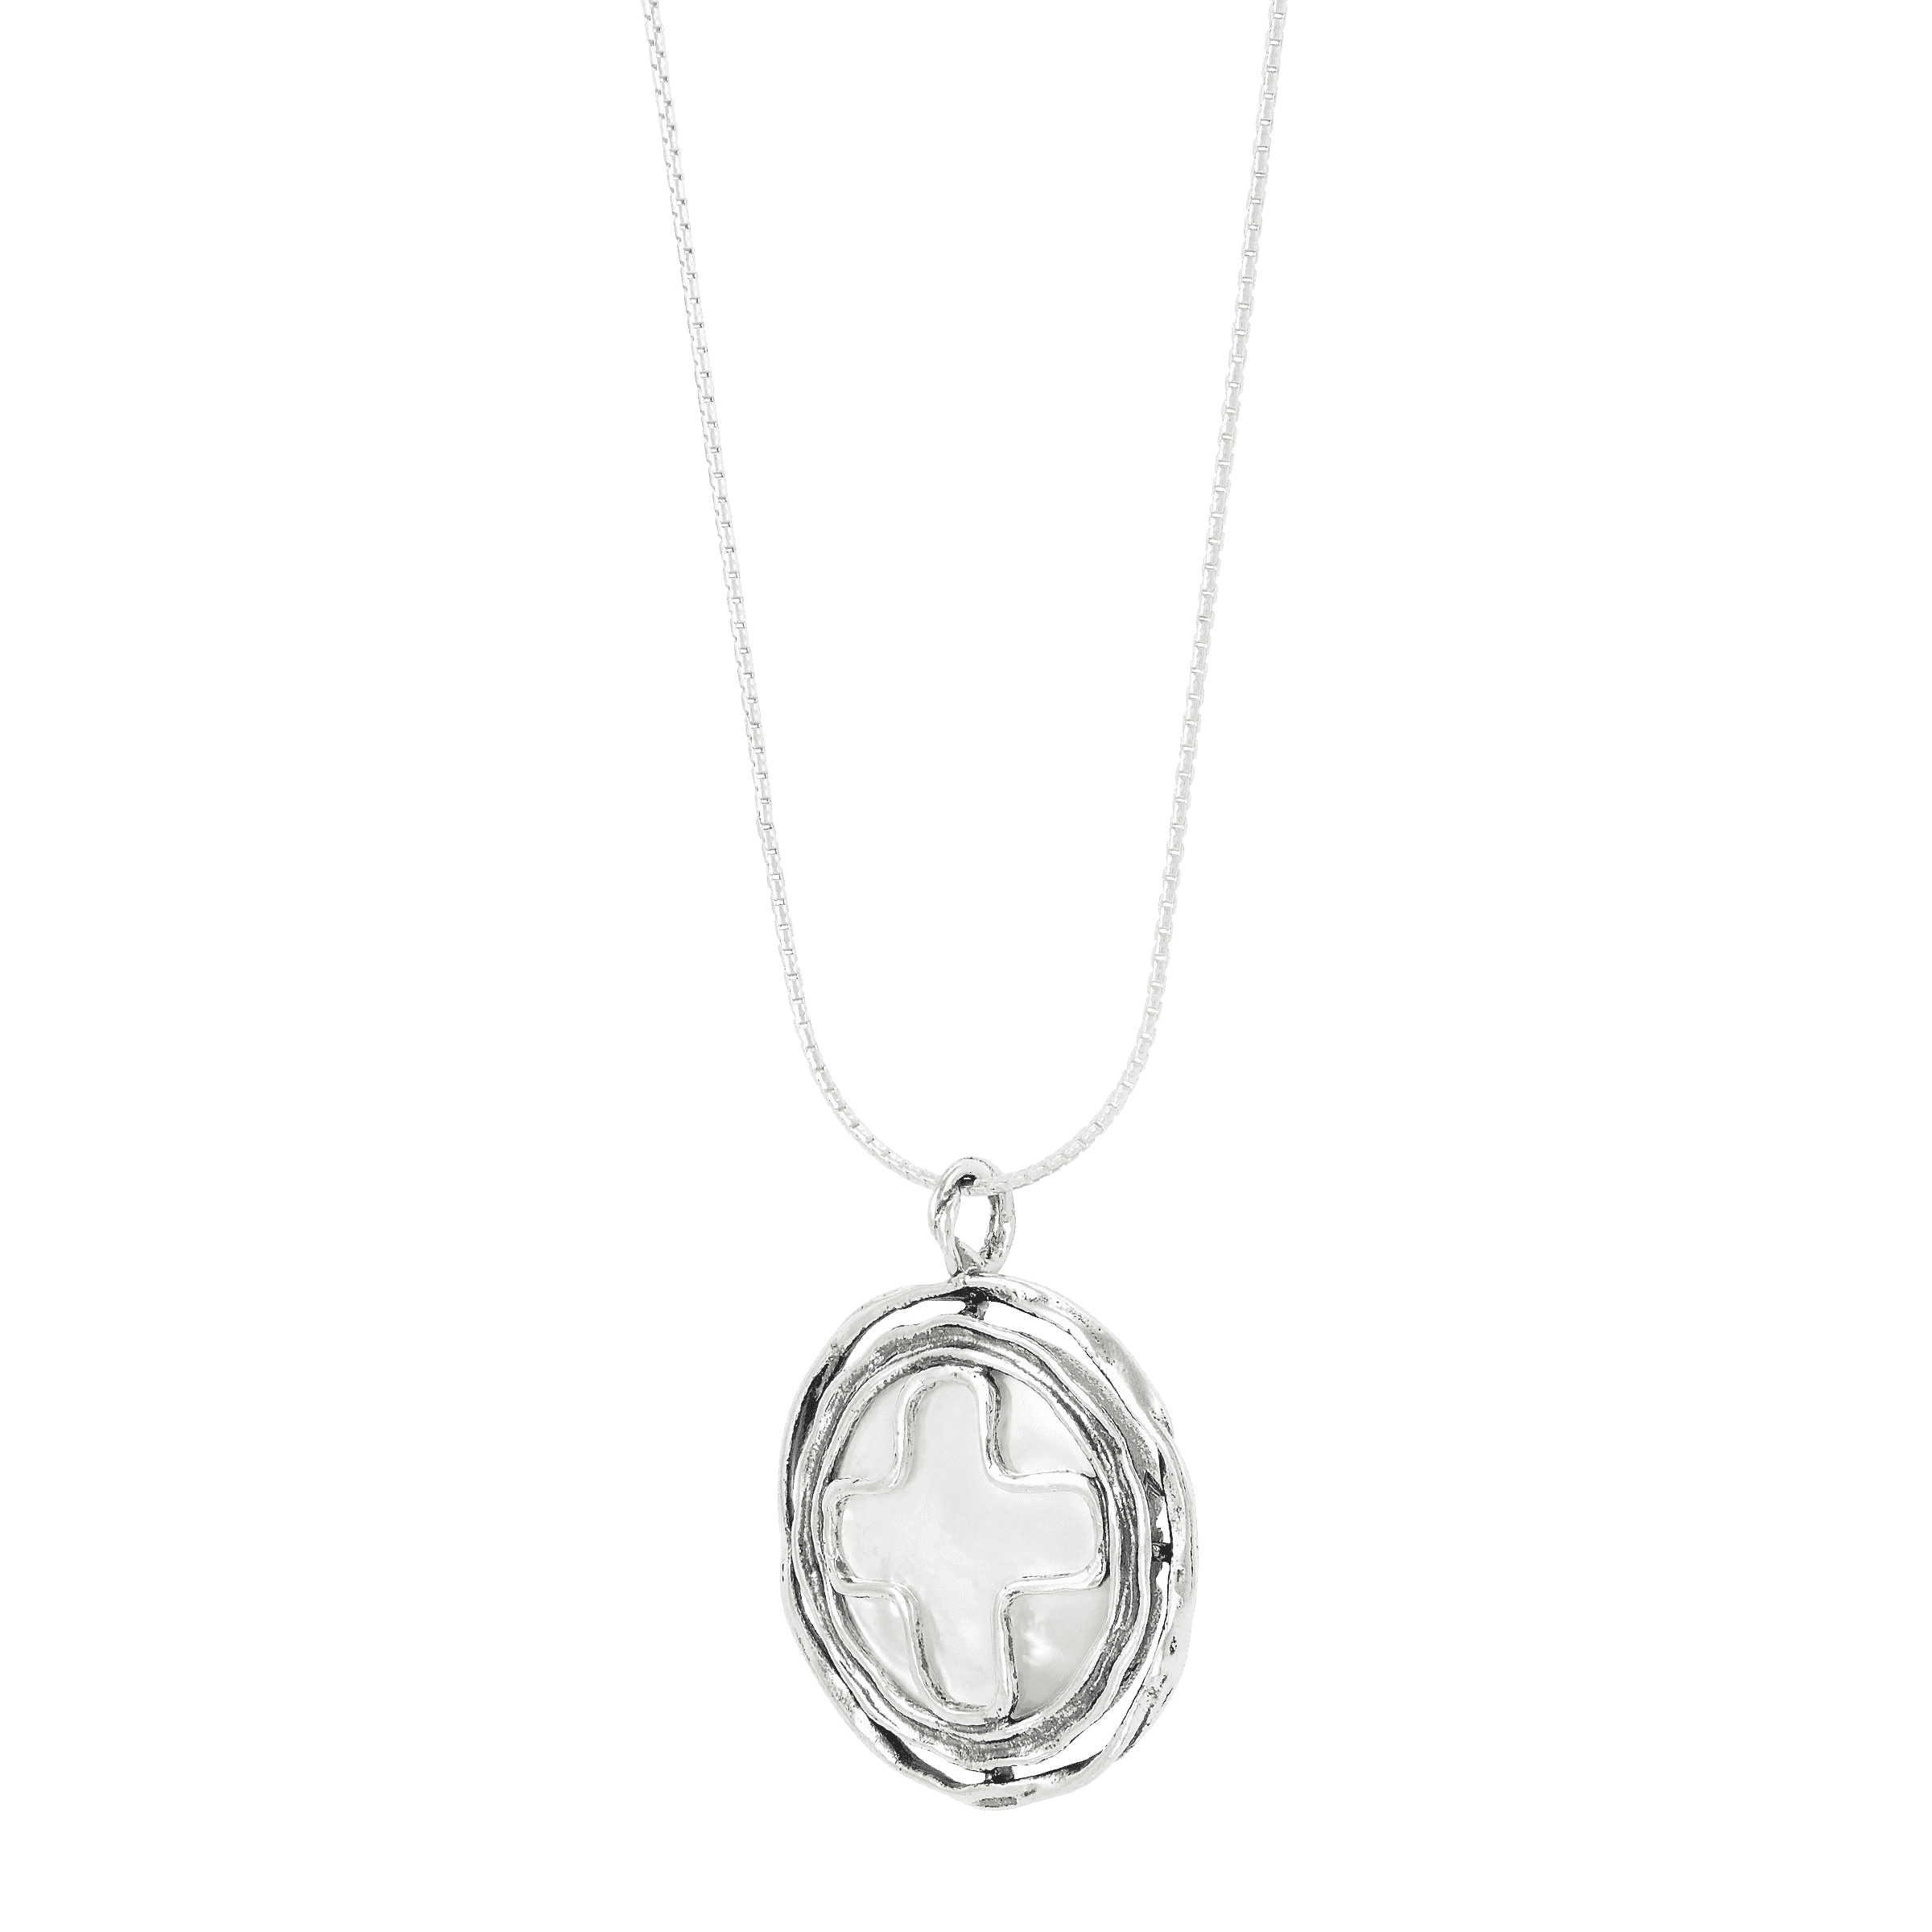 Silpada 'Hidden Meaning' Mother-of-Pearl Necklace in Sterling